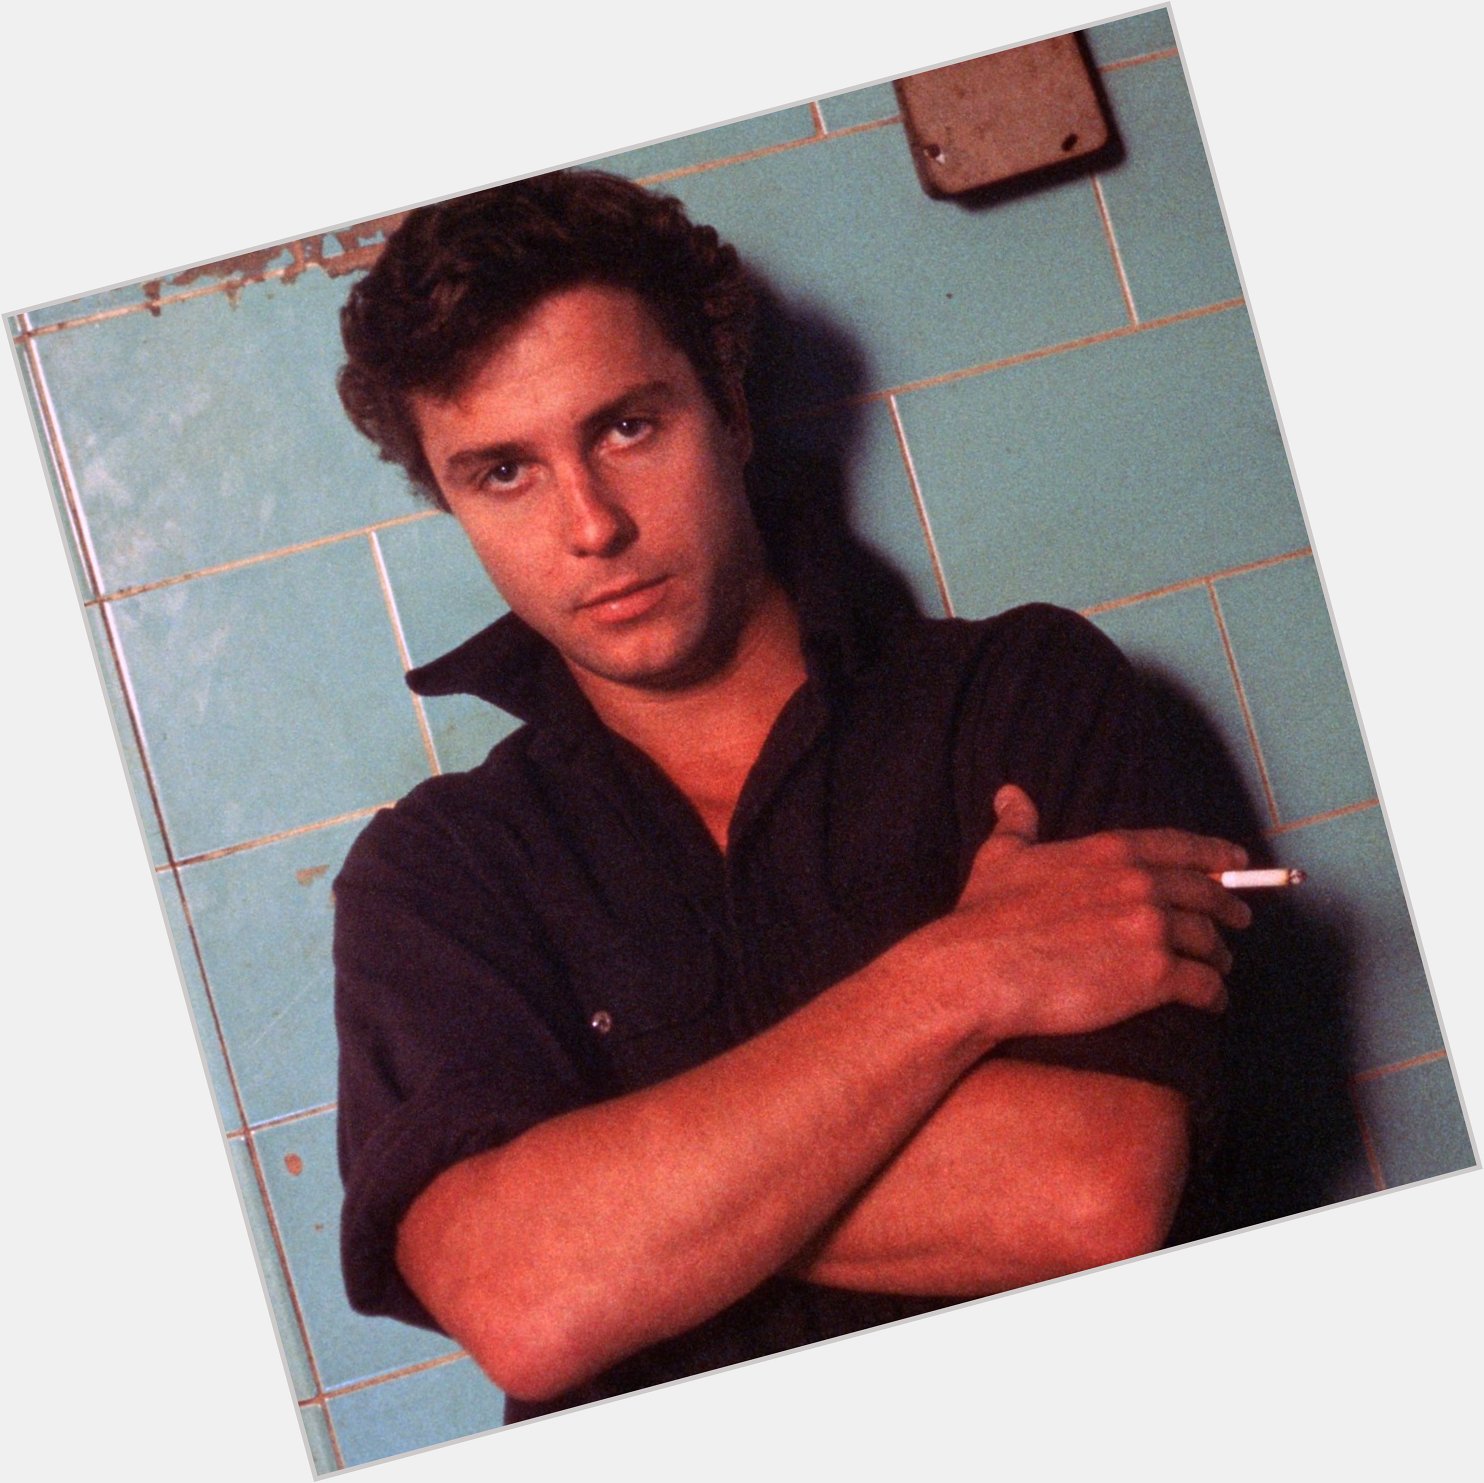 Happy 65th birthday to To Live and Die in L.A. star William Petersen! 